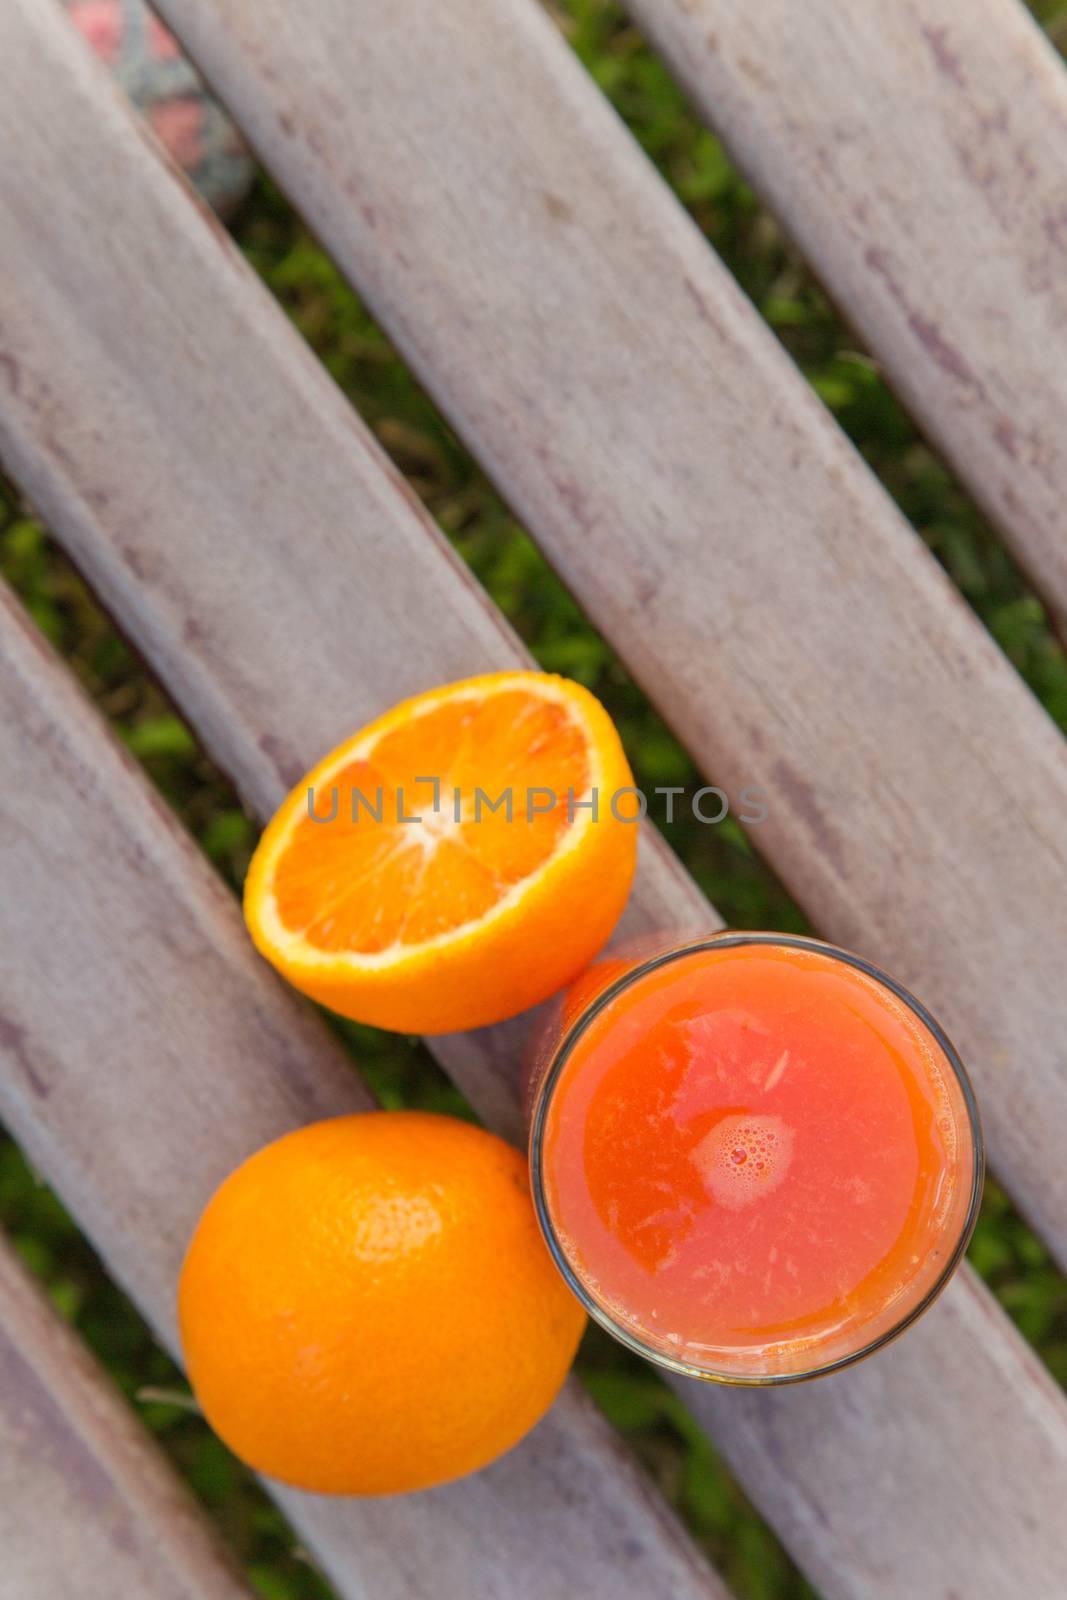 Oranges and a glass of fresh orange juice on the wooden surface.Top view